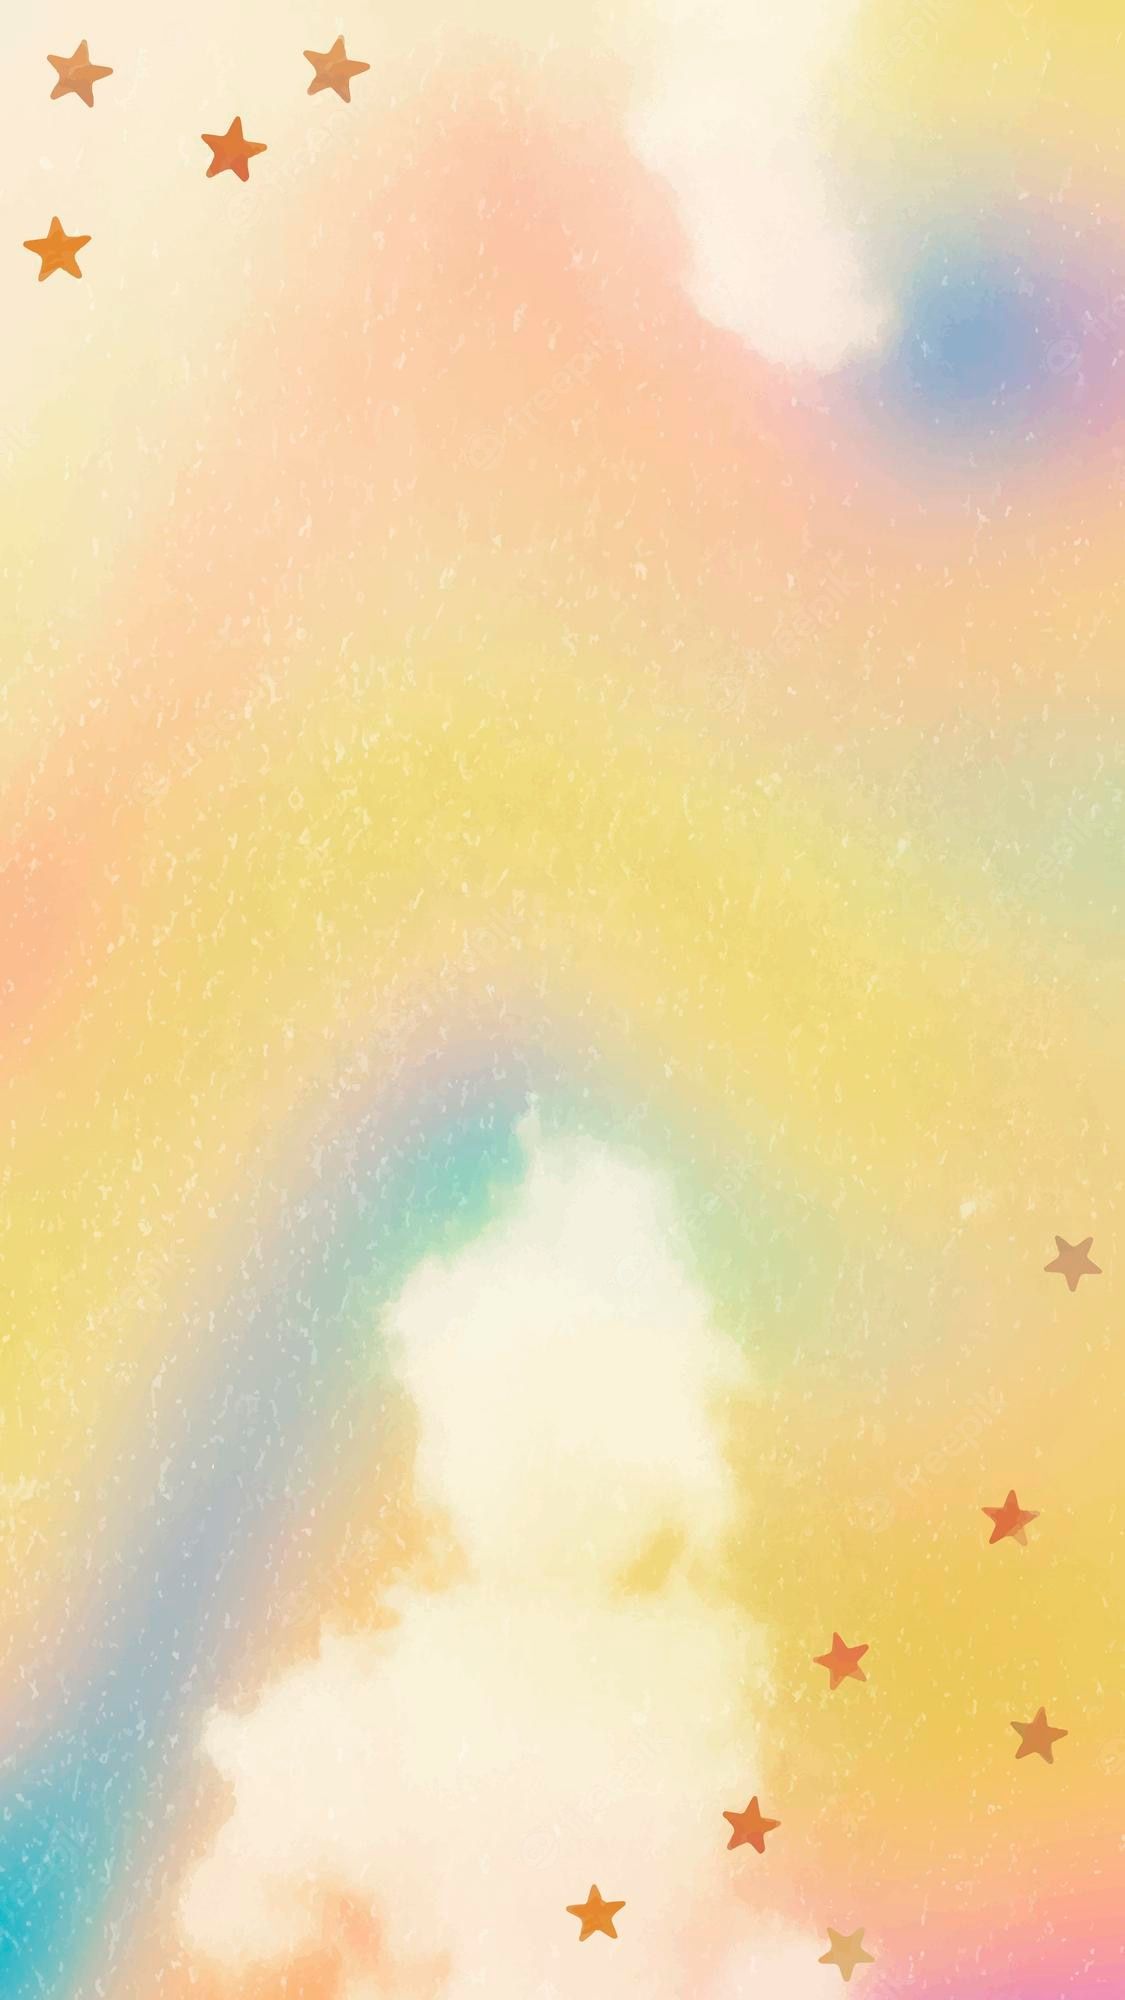 A rainbow colored background with stars and clouds - Watercolor